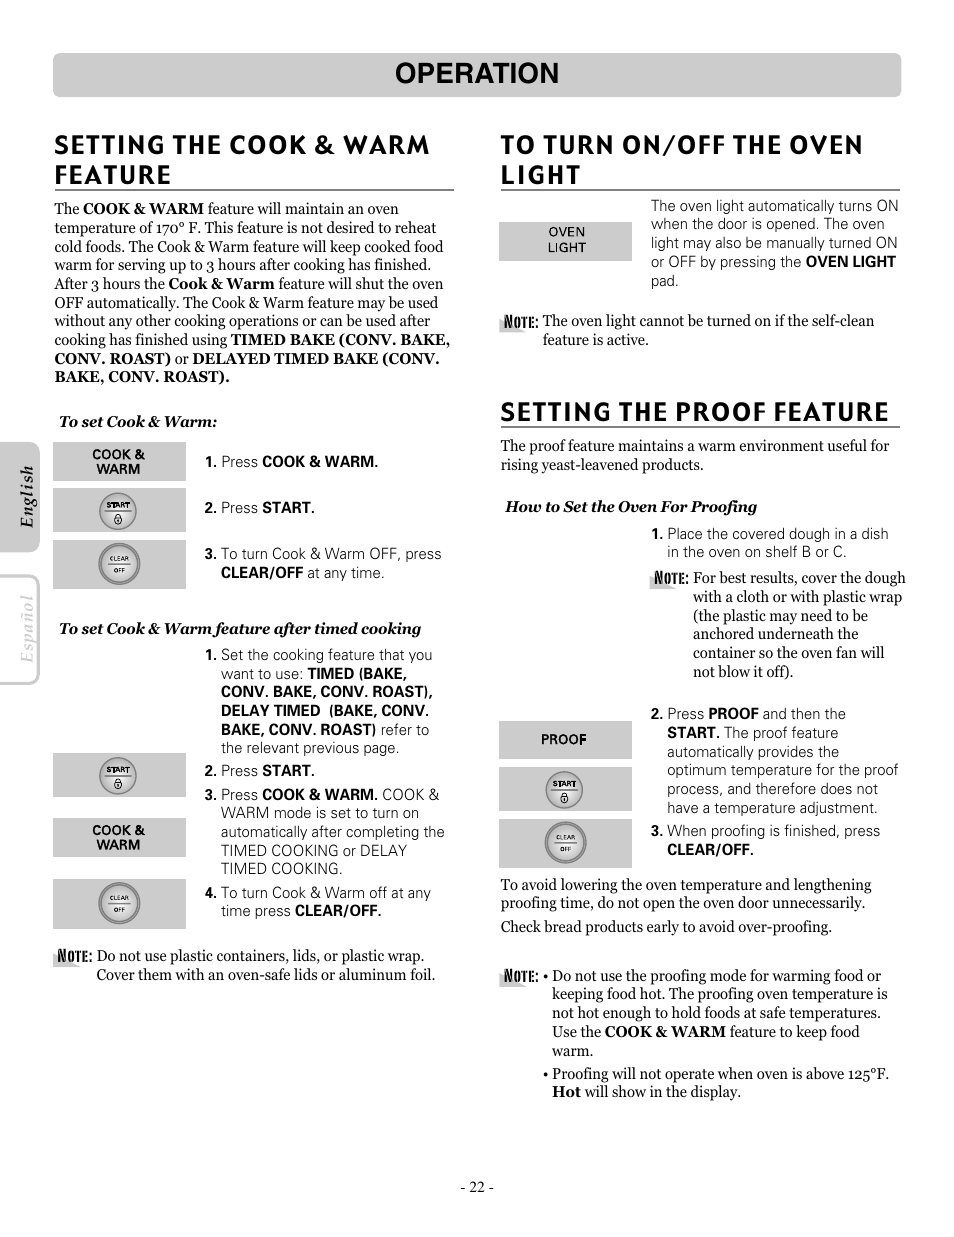 Operation, Setting the proof feature | LG LRE30451ST User Manual | Page 22 / 34